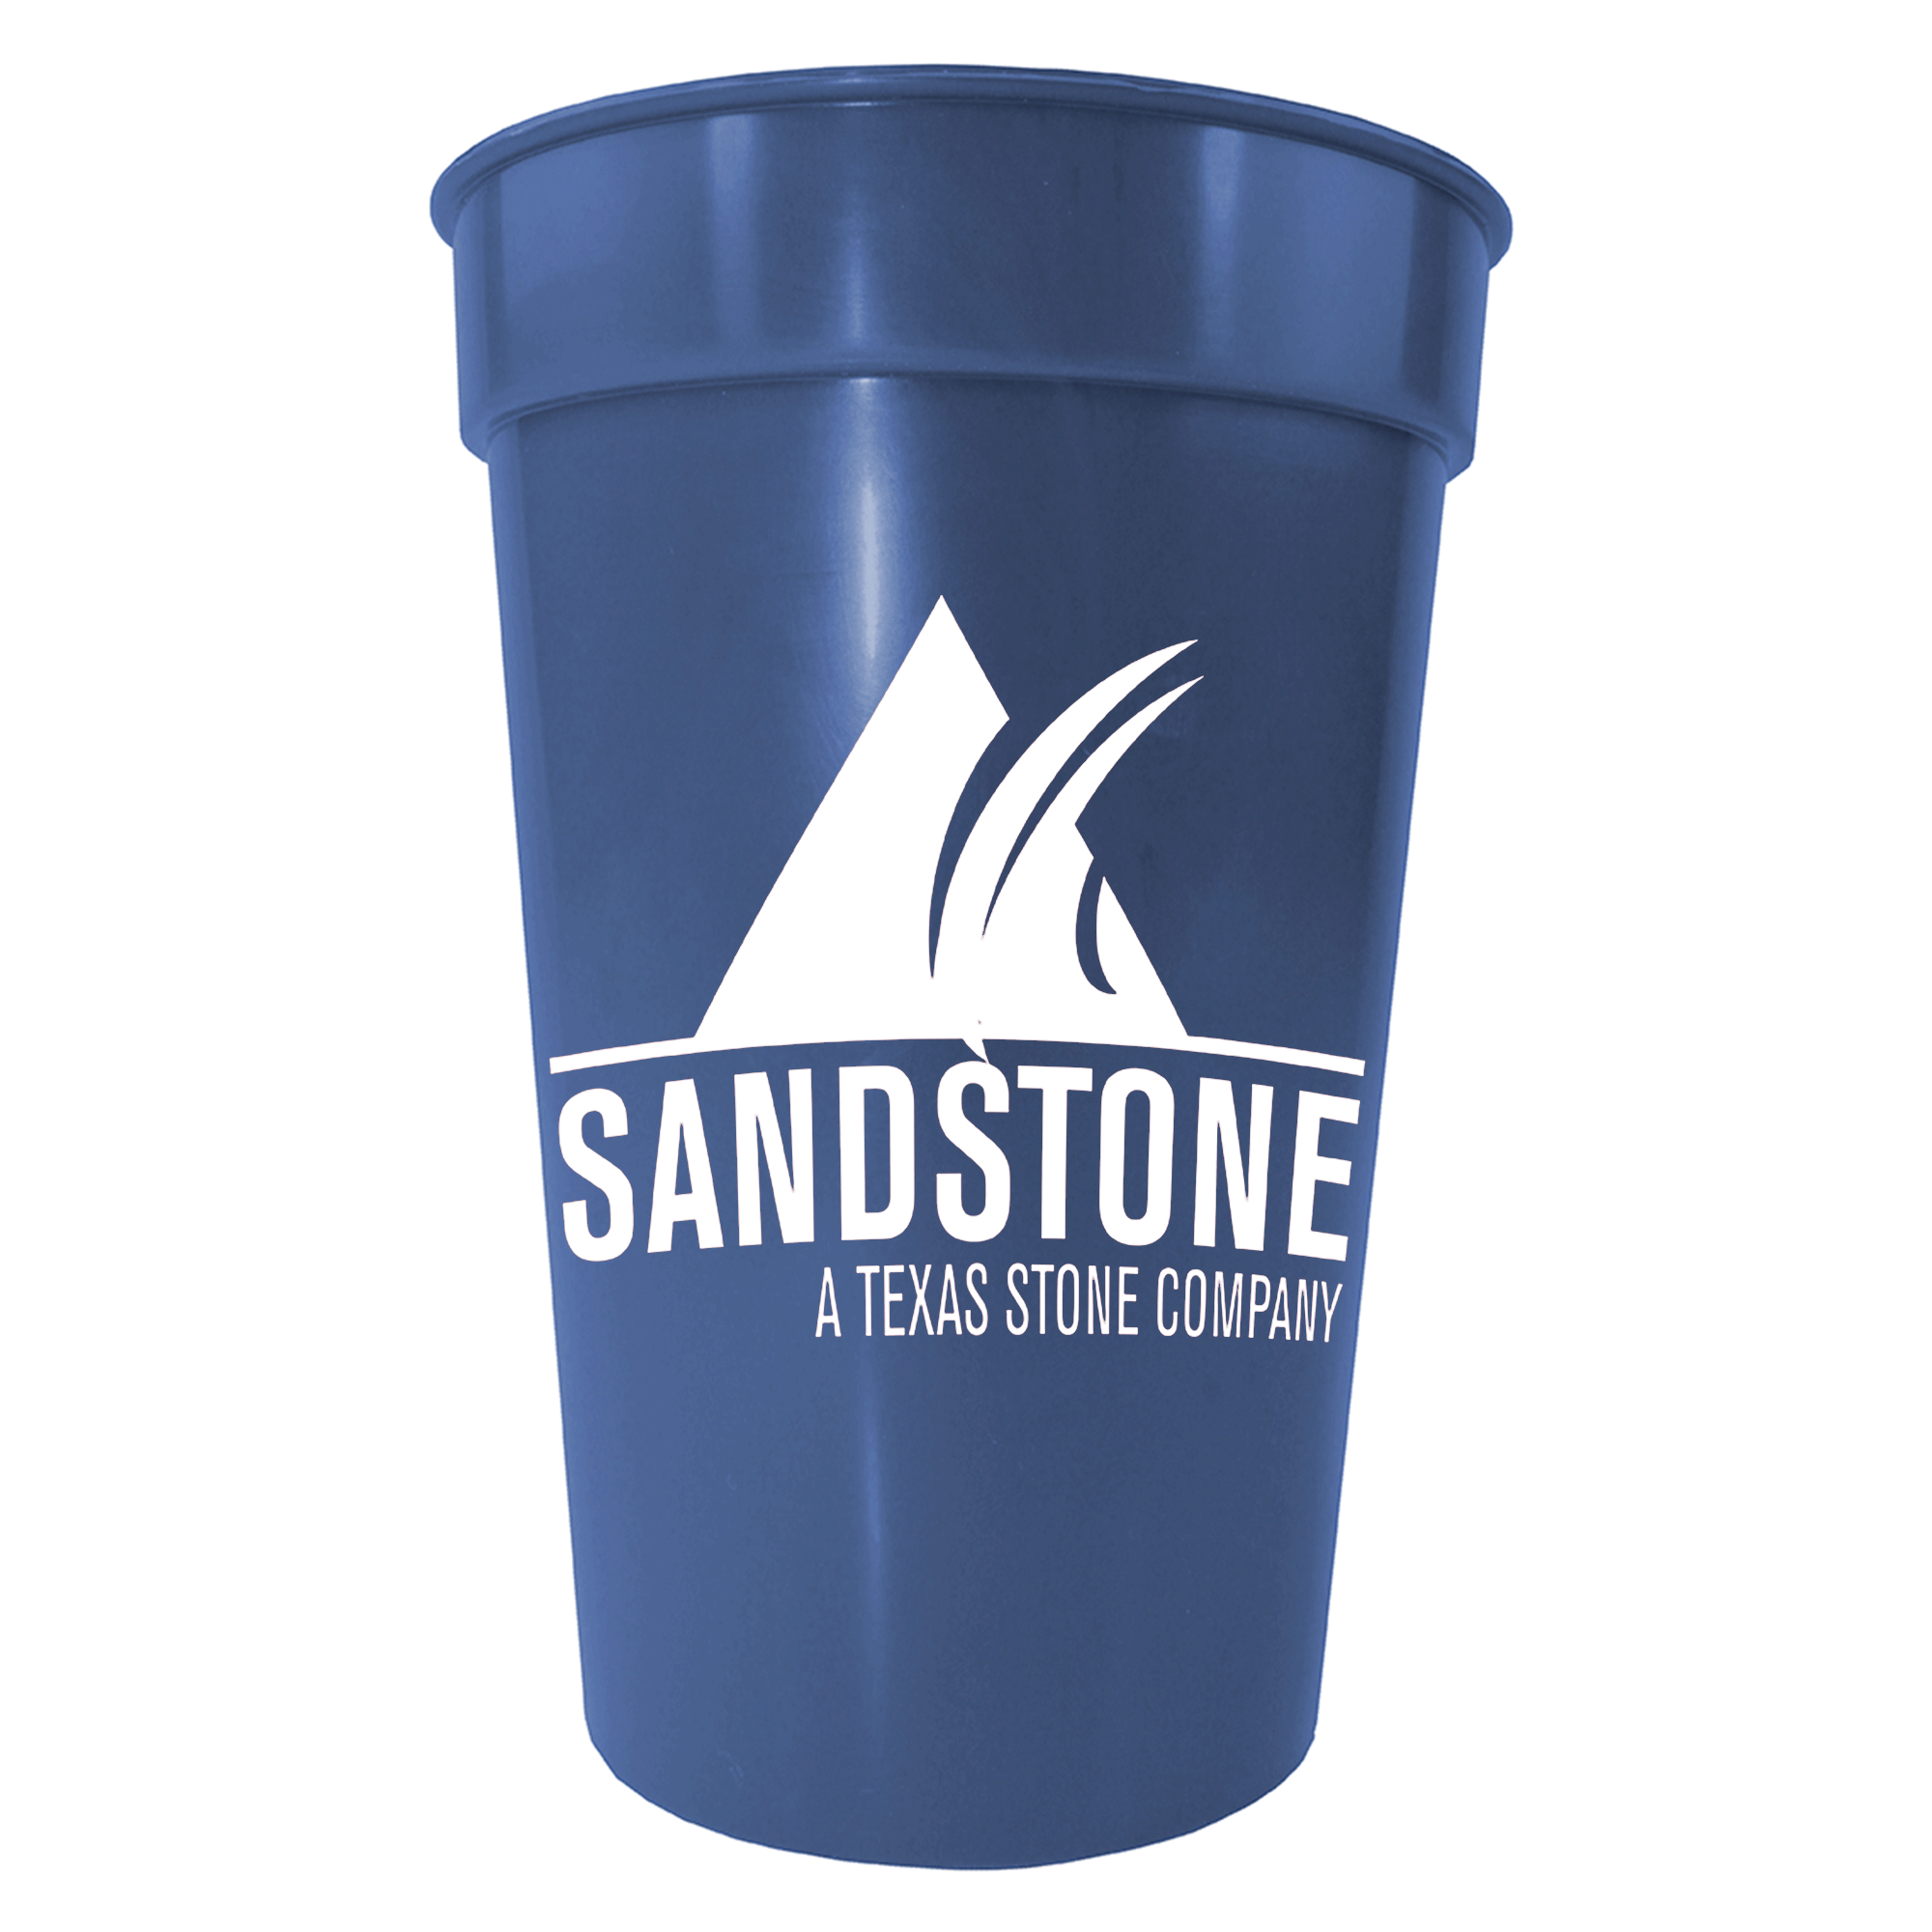 Custom Printed Styrofoam Cups, Foam Cups, Personalized Party Cups, Design  Your Own Cups -  Canada